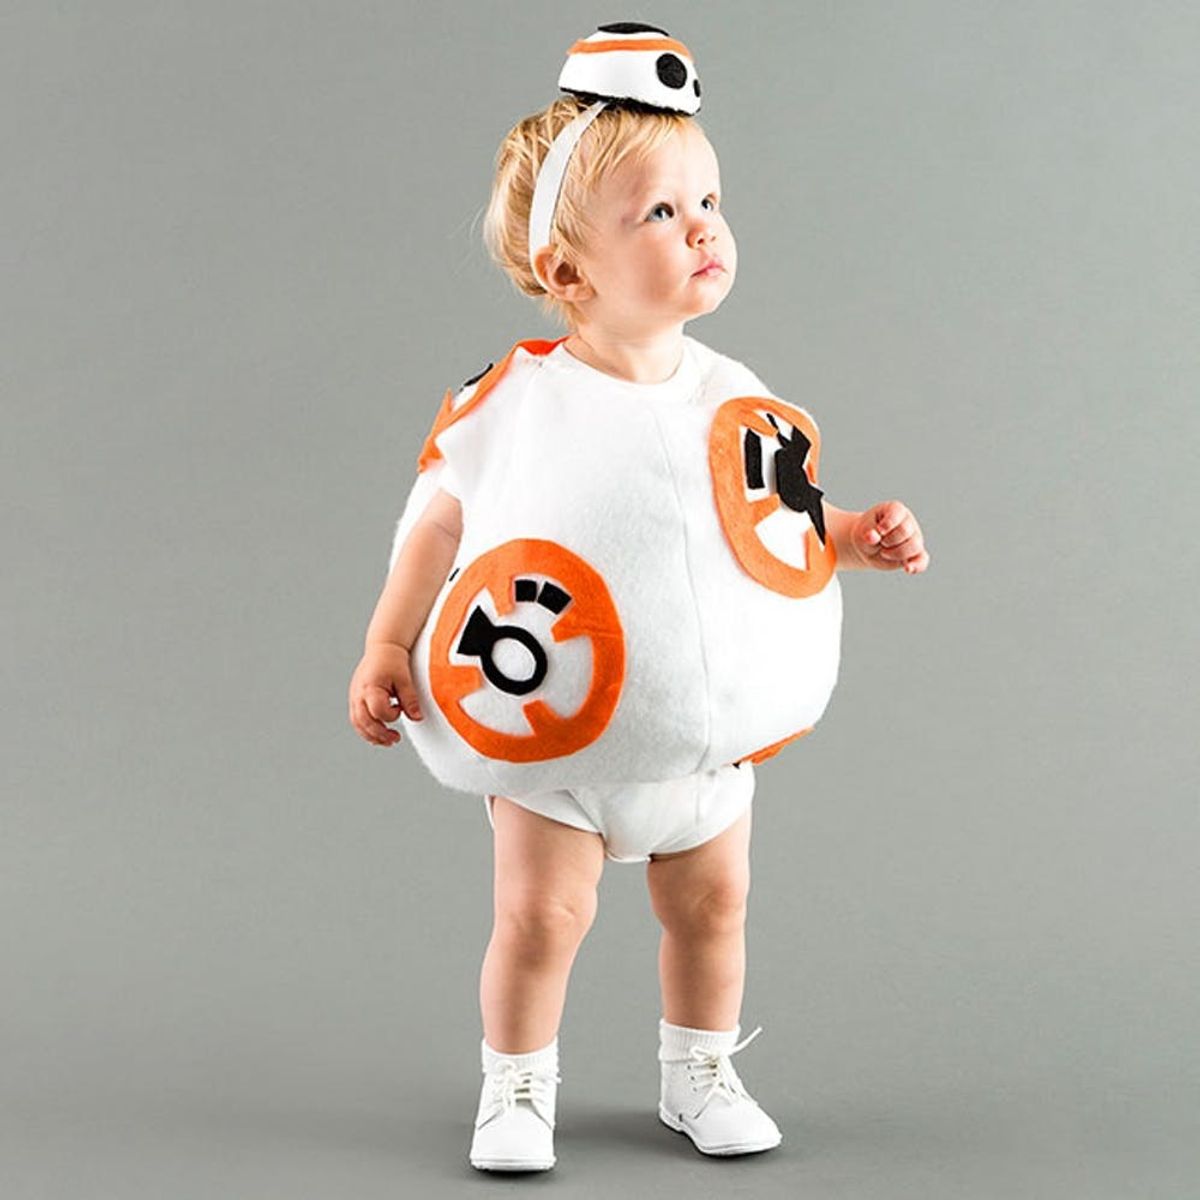 Dress Up Your Little Love Bug in this BB8 Costume for Halloween